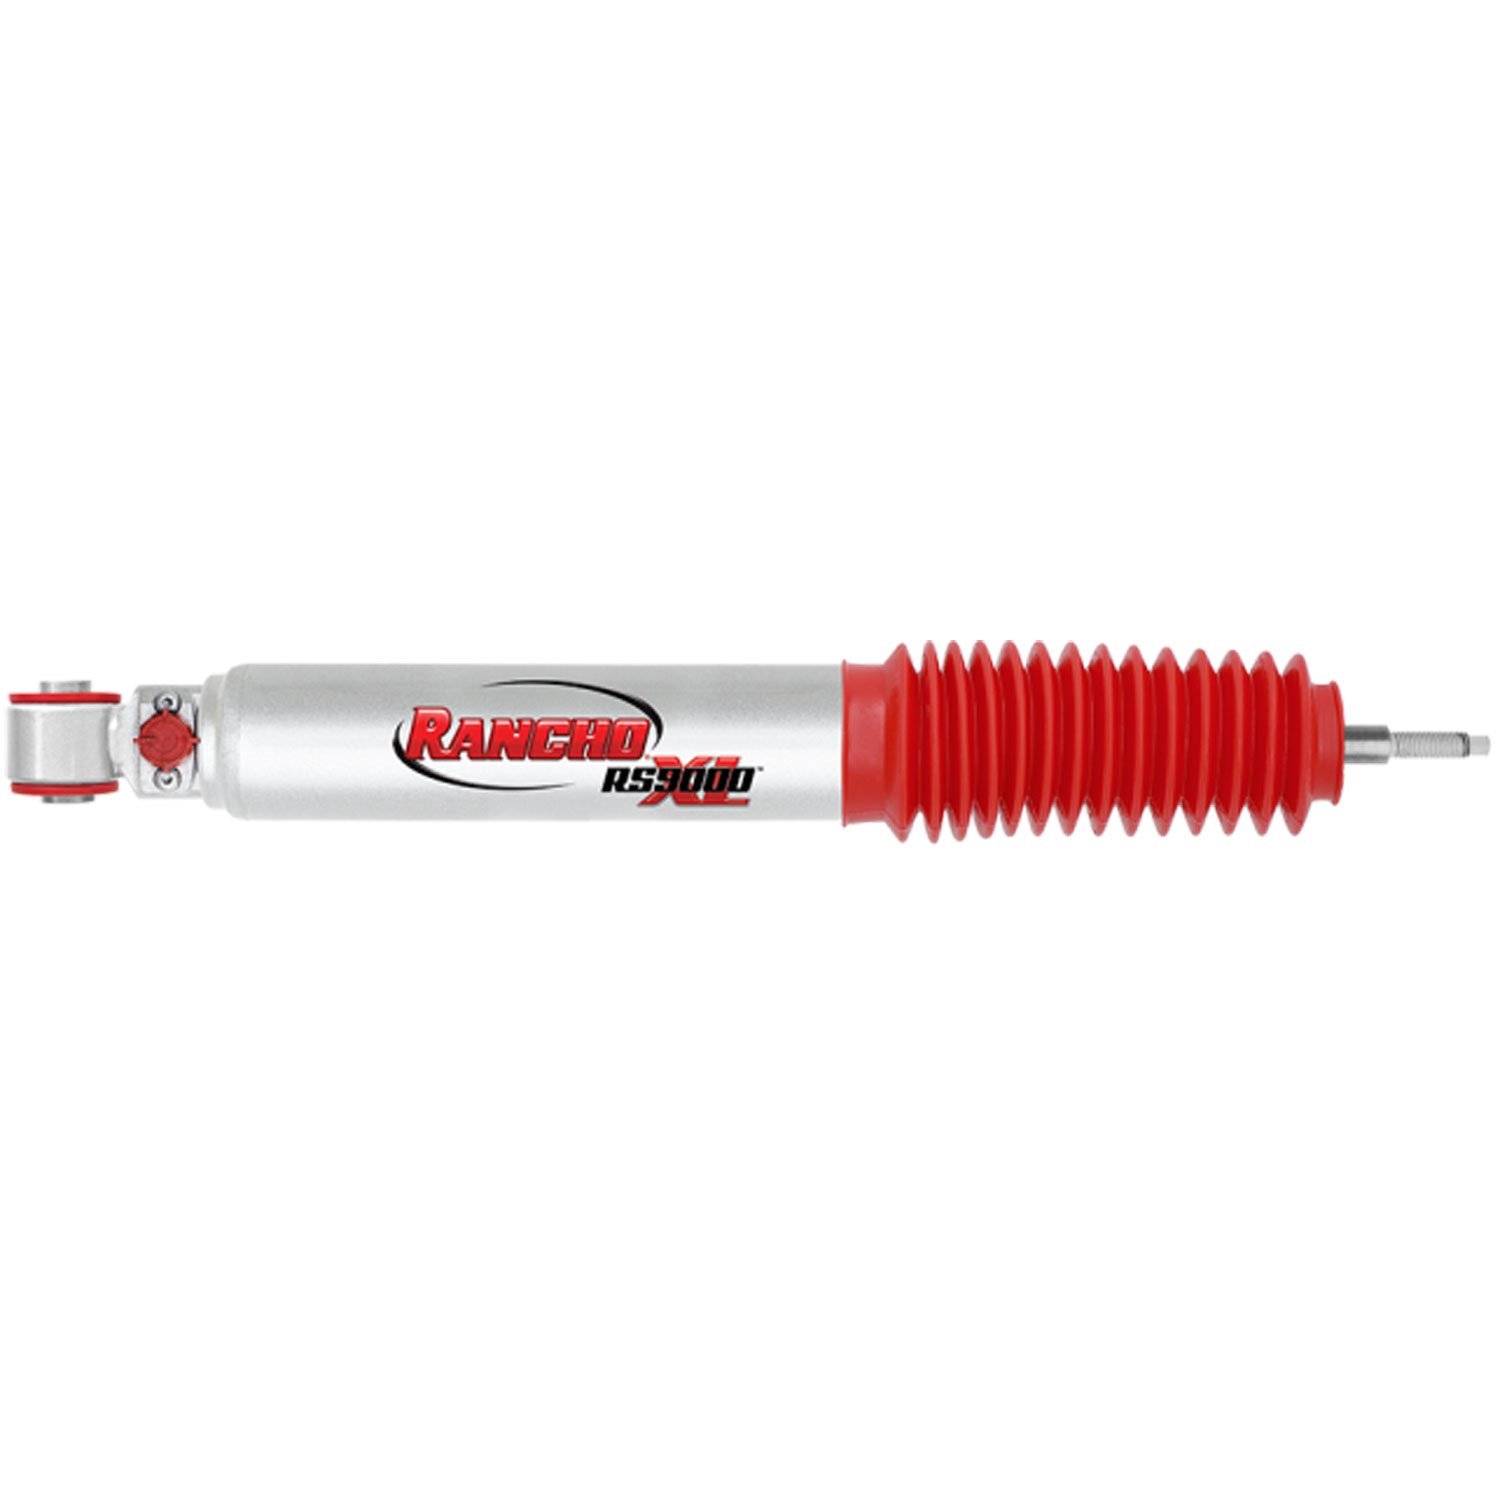 RS9000XL Front Shock Absorber Fits for Nissan D21, Frontier and Xterra